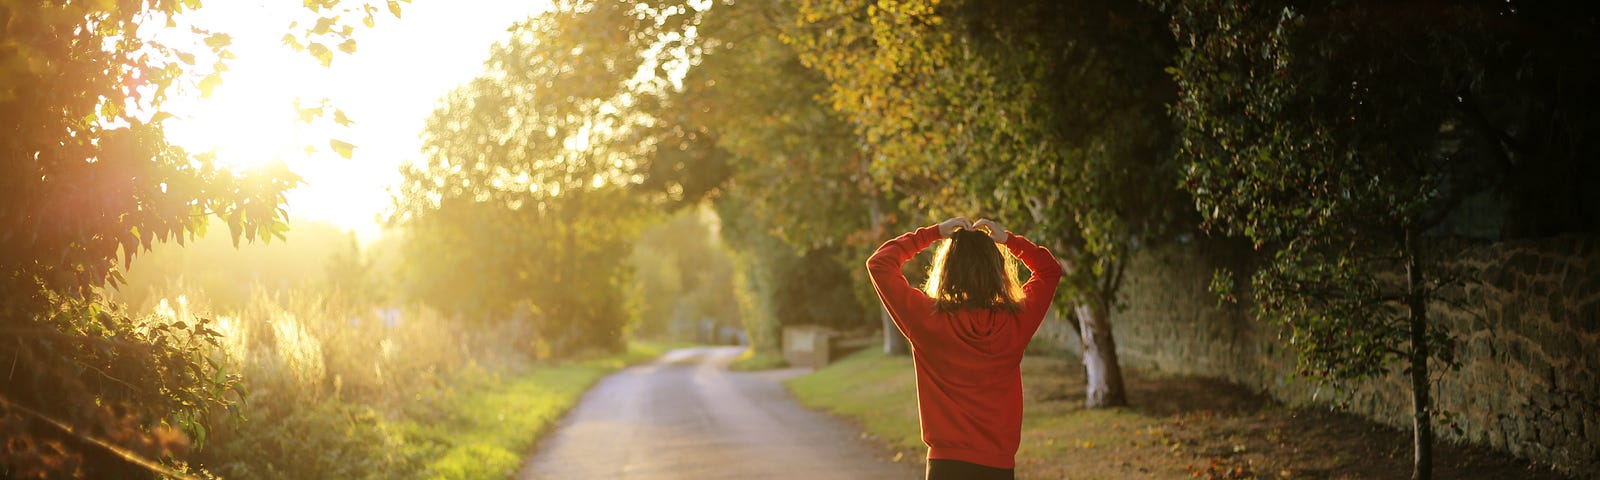 A woman walks on a path surrounded by trees, with the a bright white sky in the distance. The woman wears an orange sweatshirt and black sweatpants. Her arms are raised such that she has both hands on the top of her head.